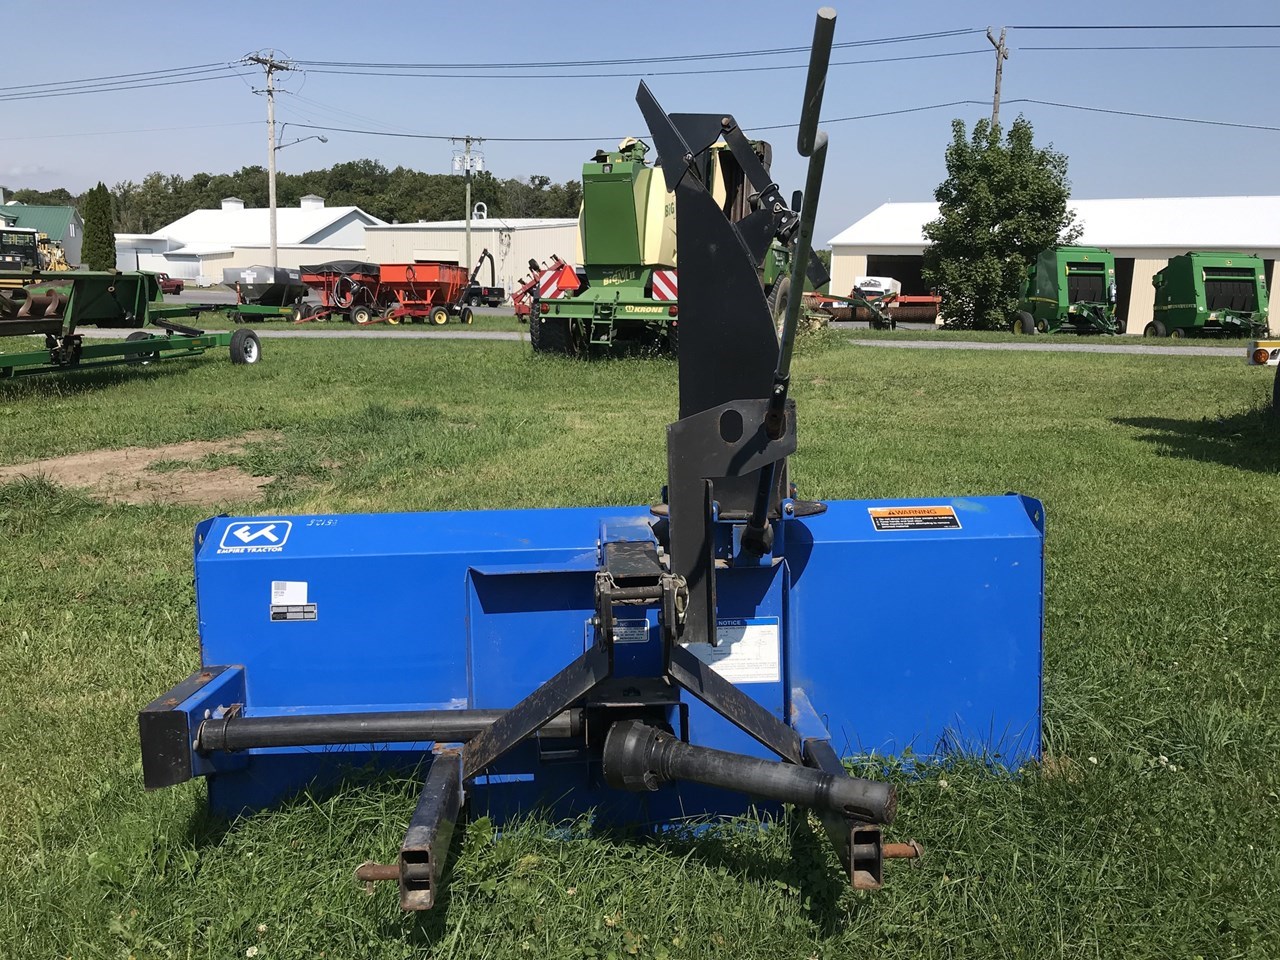 Woods SS74 Snow Blower For Sale